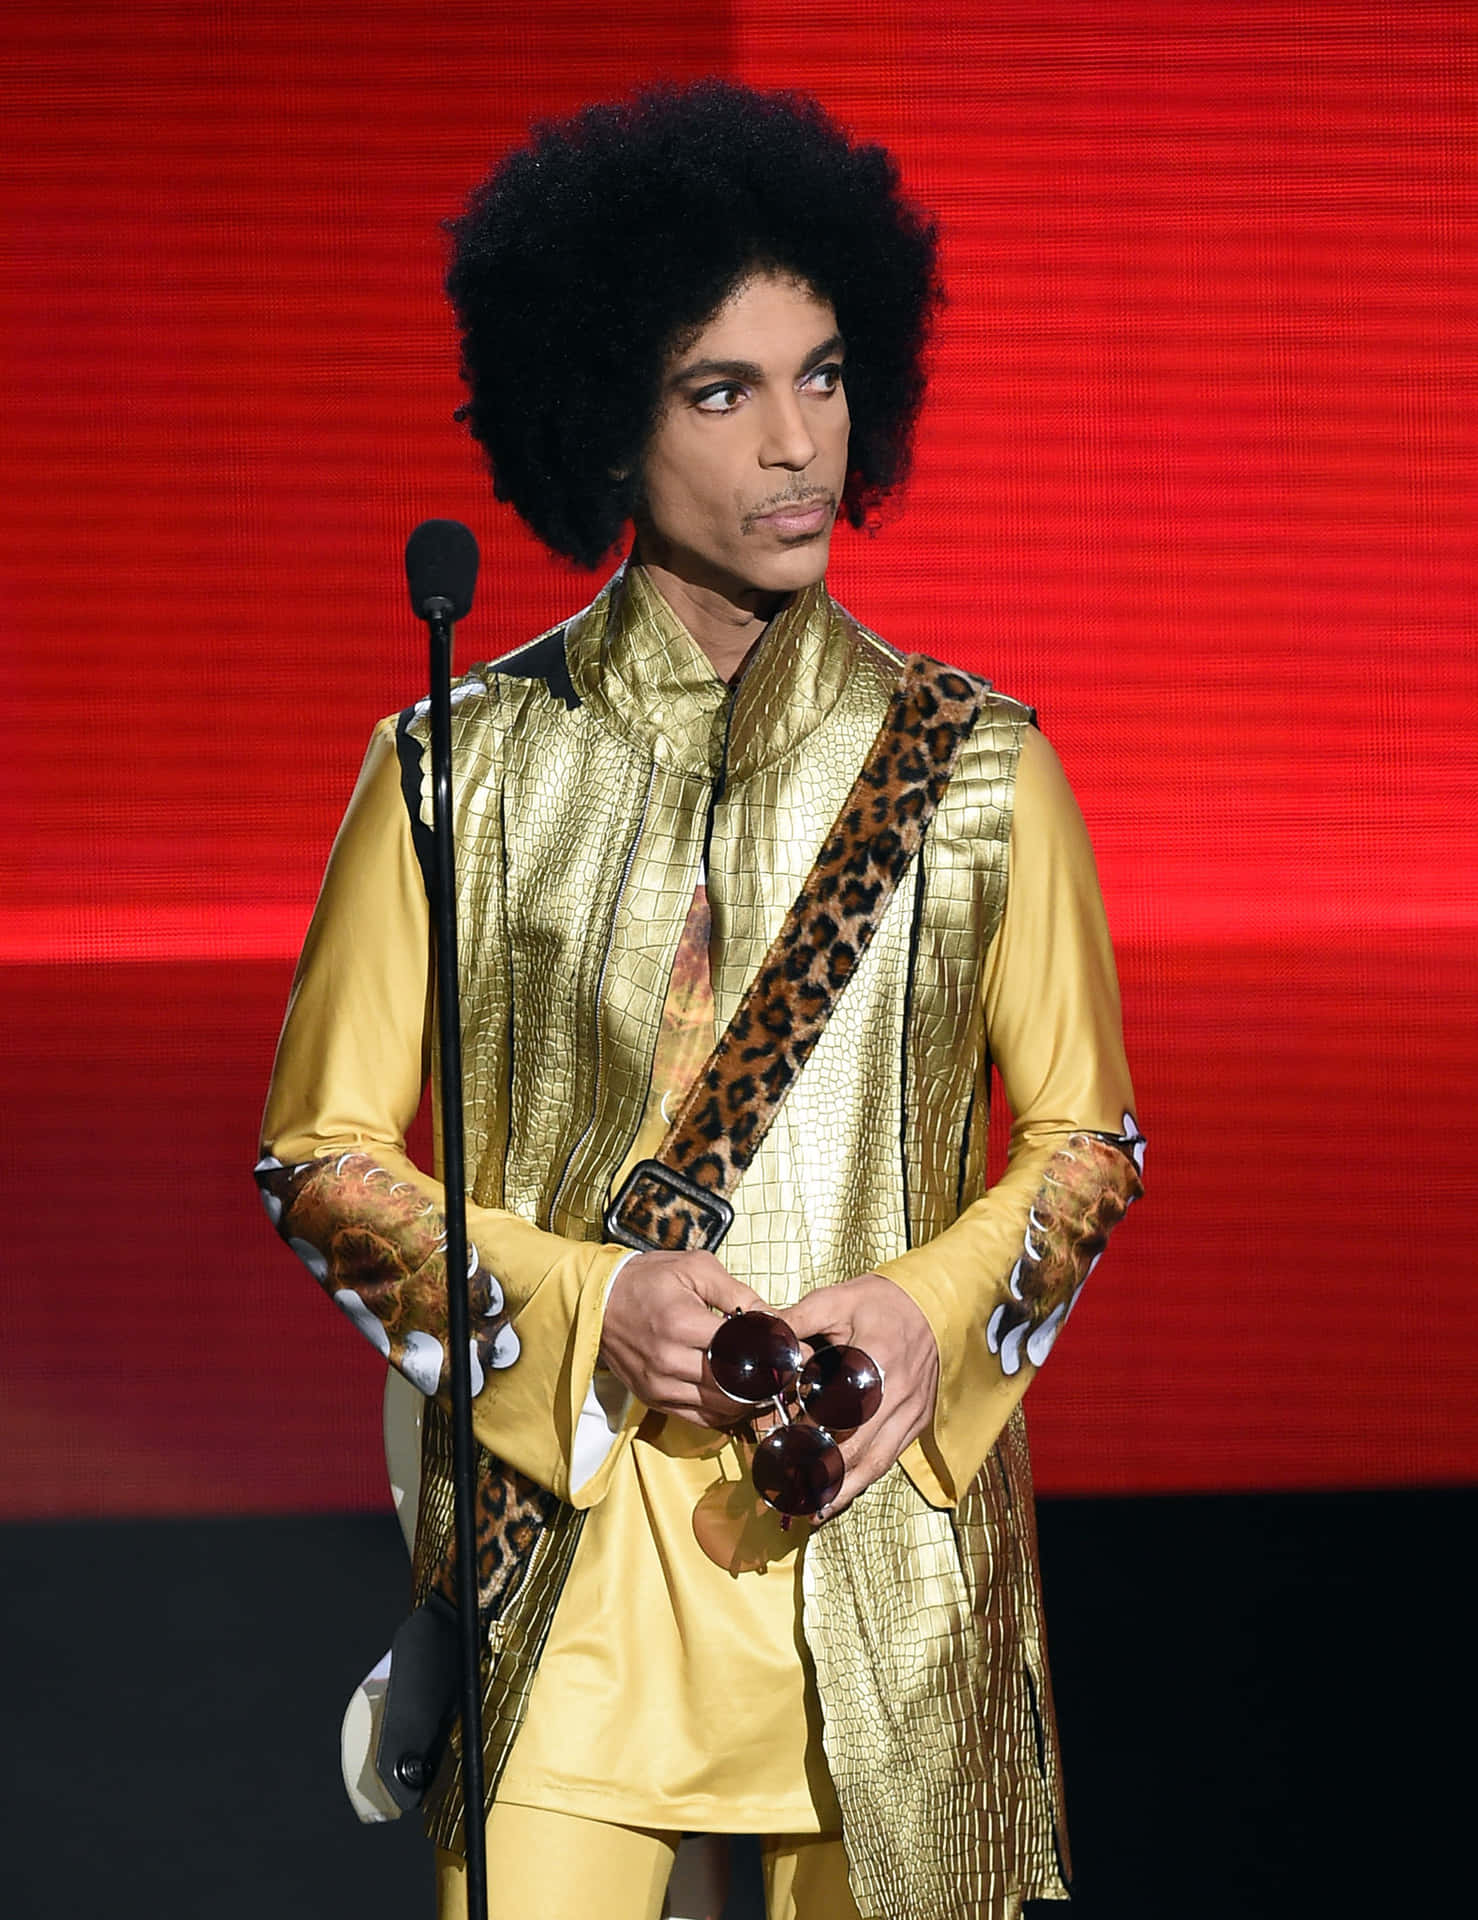 Legendary Popstar Prince Performing on Stage